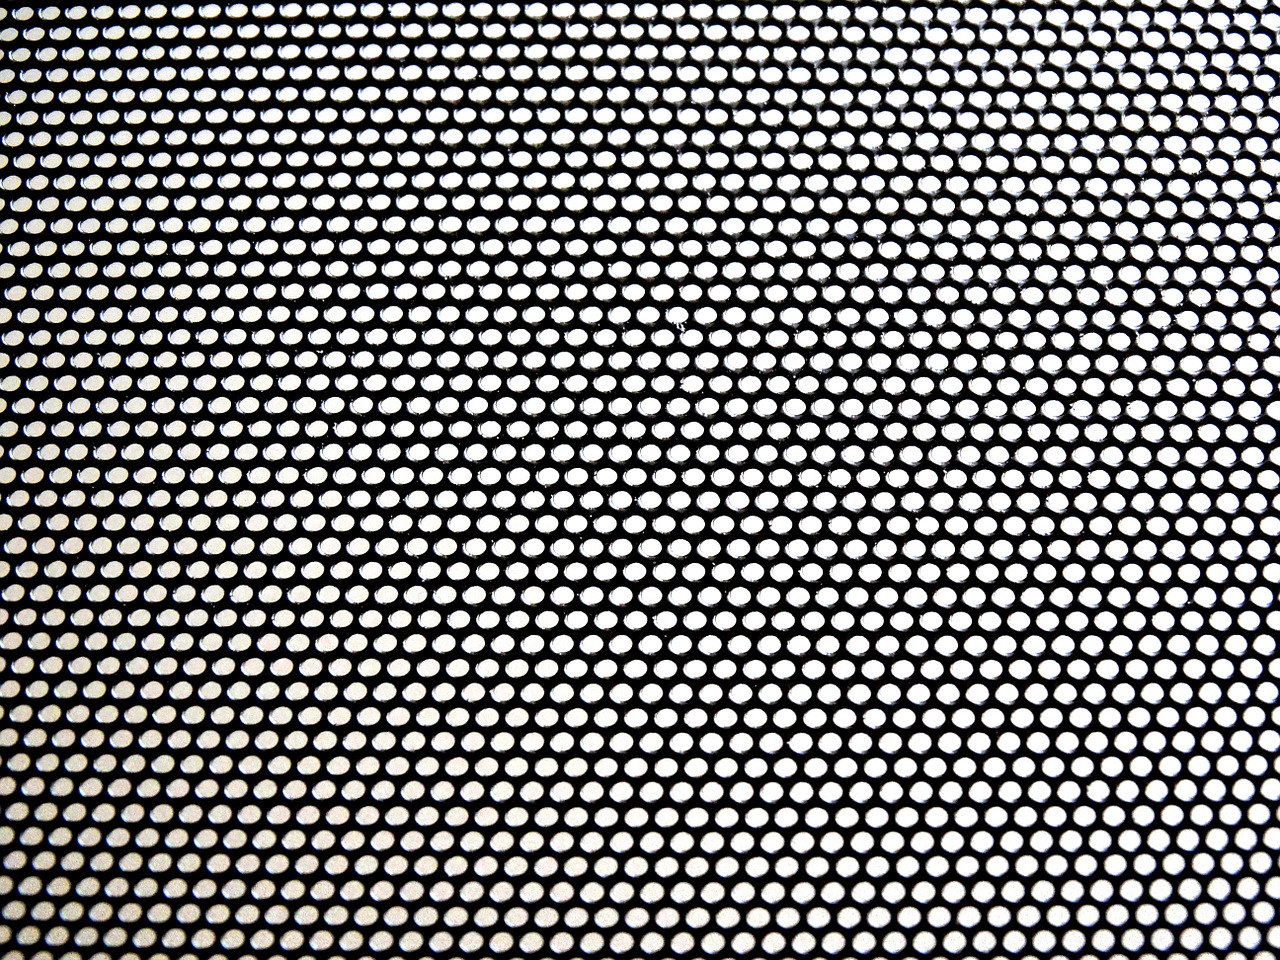 perforated sheet pattern black and white free photo